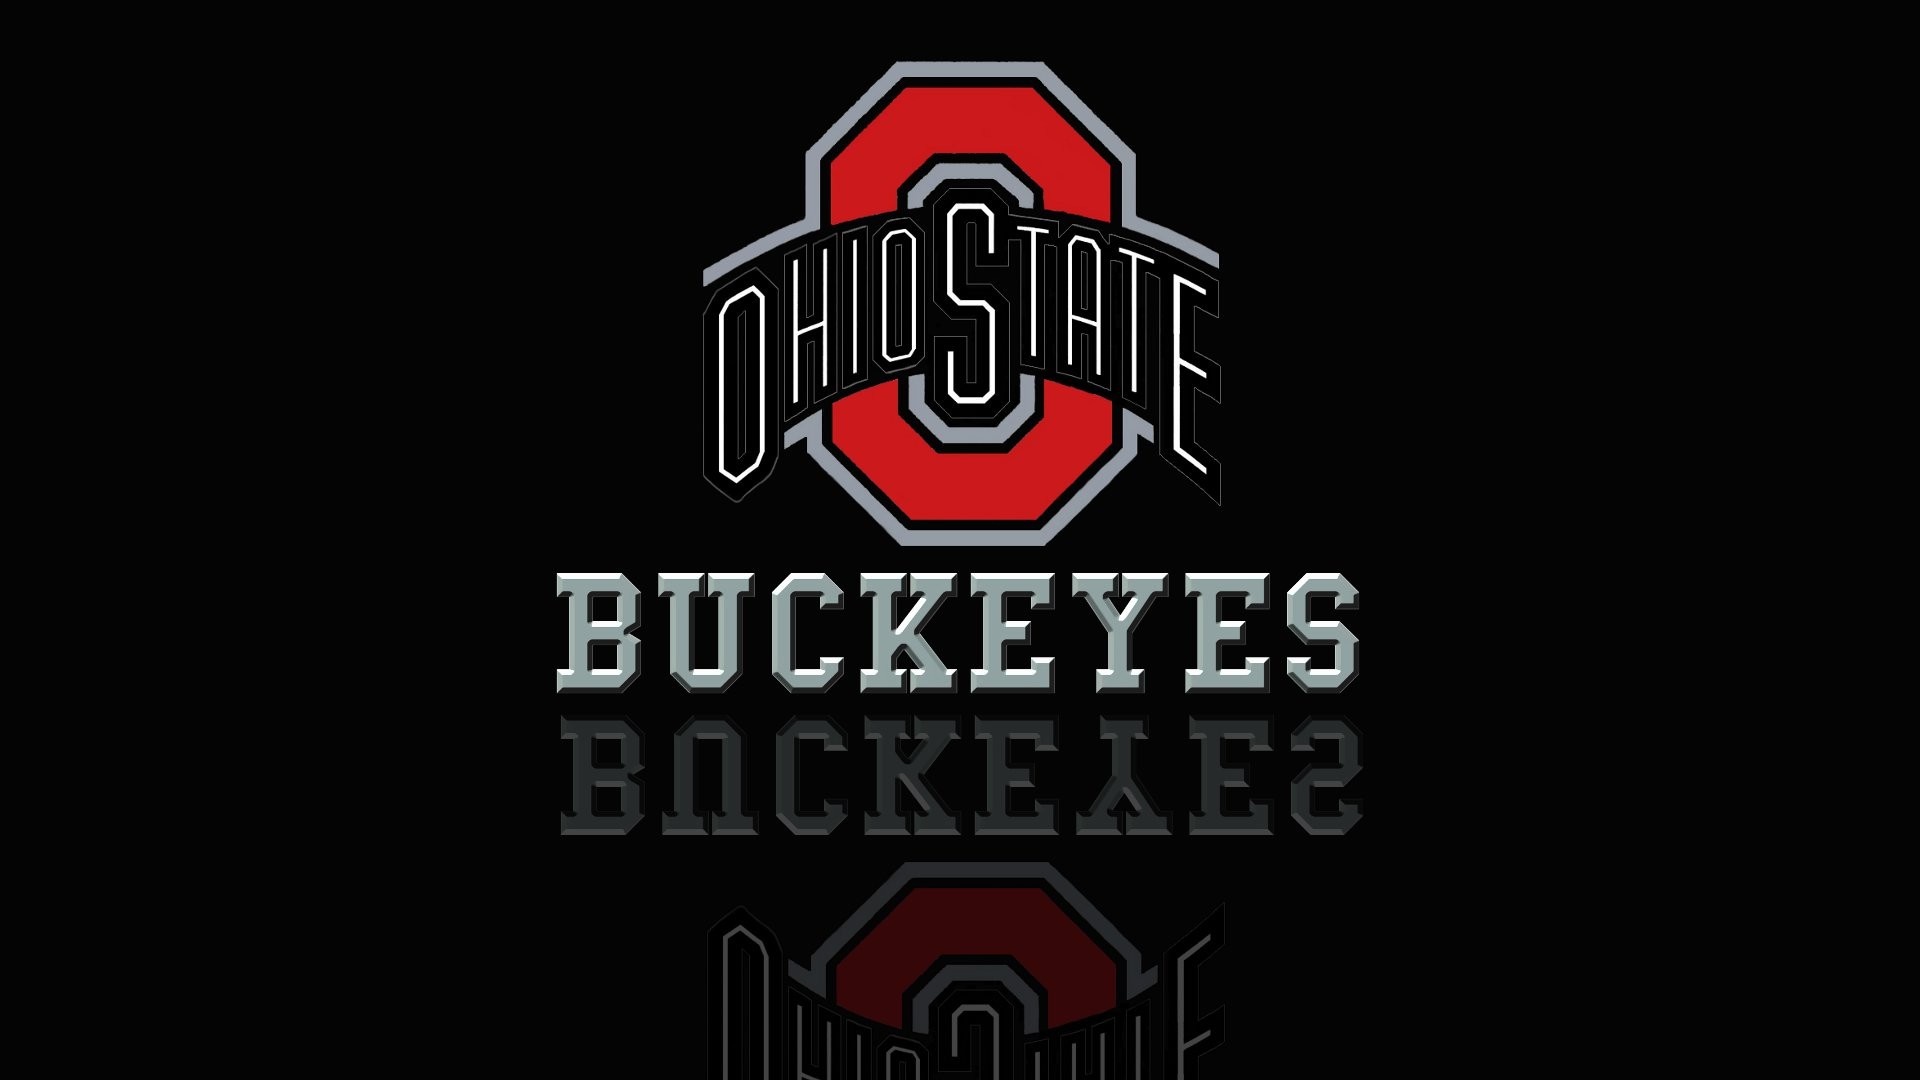 Ohio State Football images OSU Wallpaper 150 HD wallpaper and .